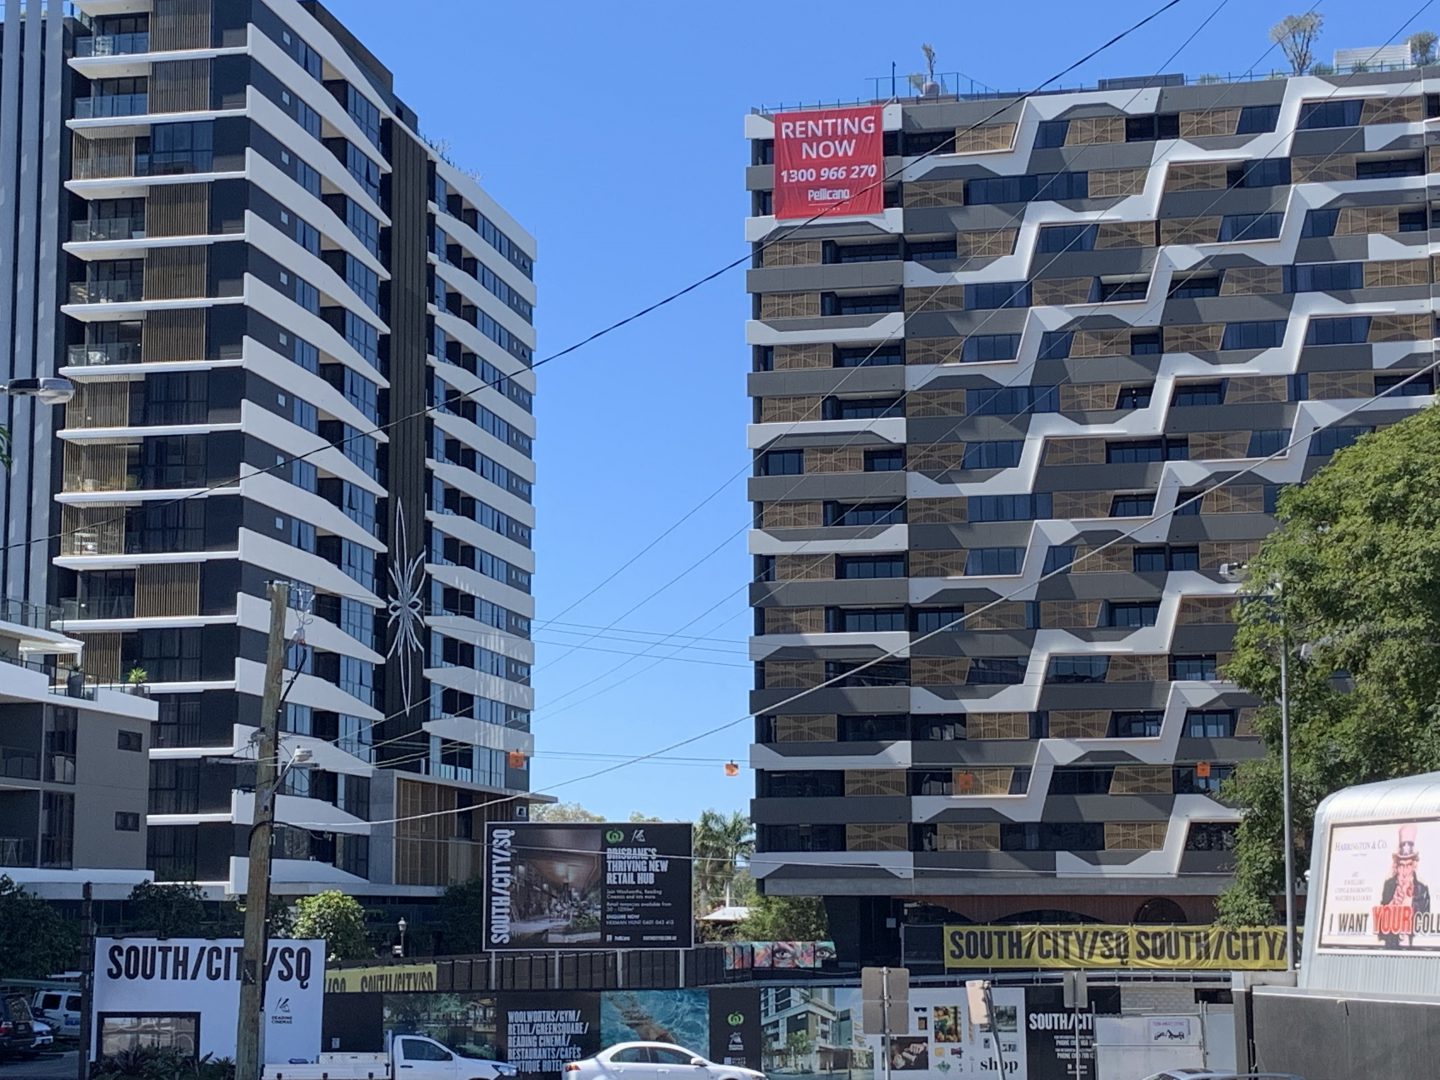 South City Square Construction Update (photo taken 02/09/2019 by the PropertyMash.com team)